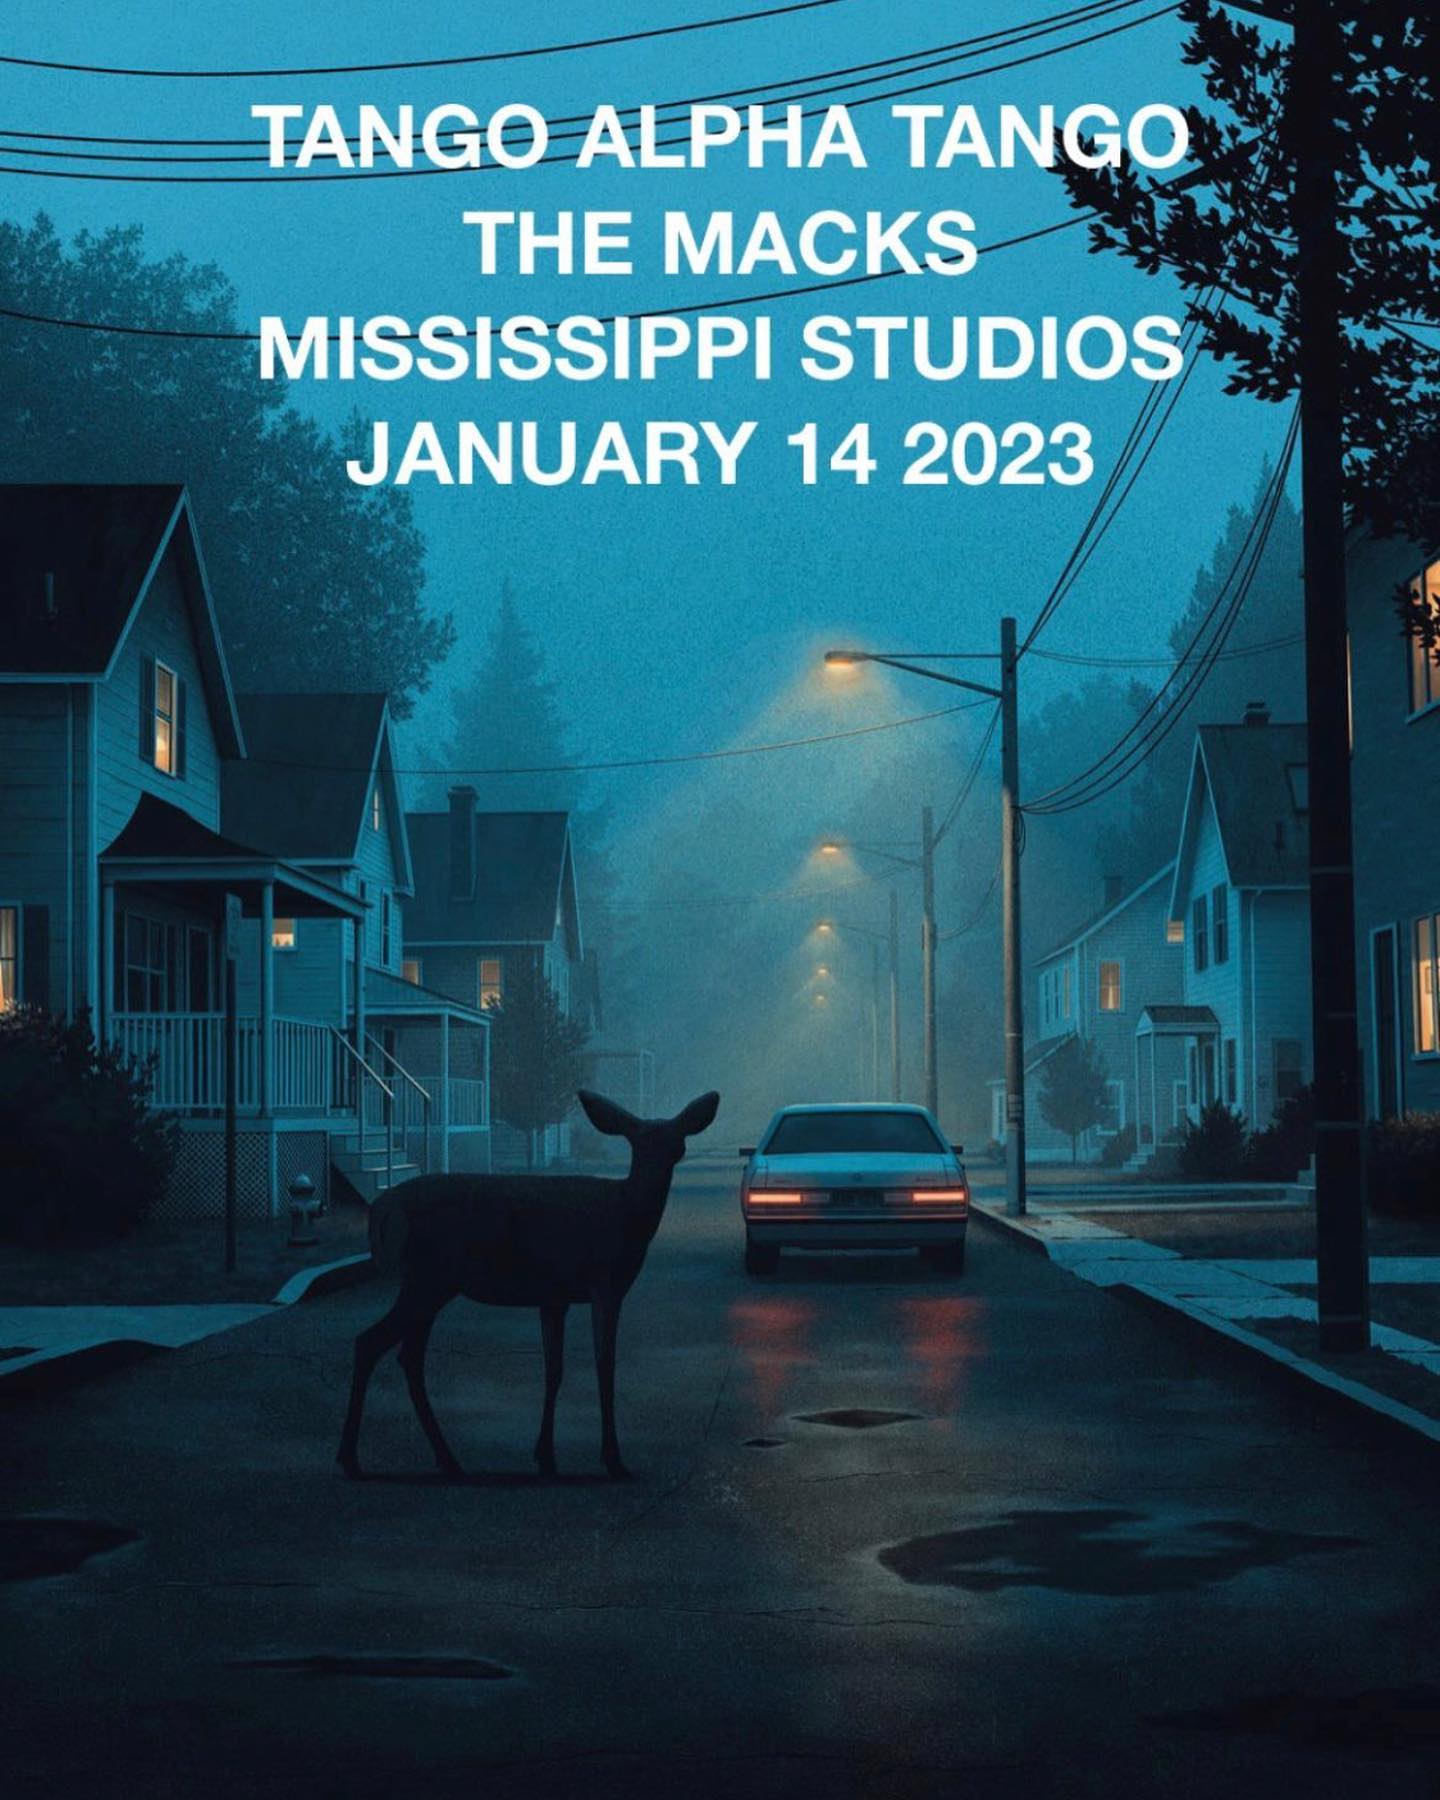 Show poster for Tango Alpha Tango and The Macks at Mississippi Studios with foggy blue street and deer silhouette